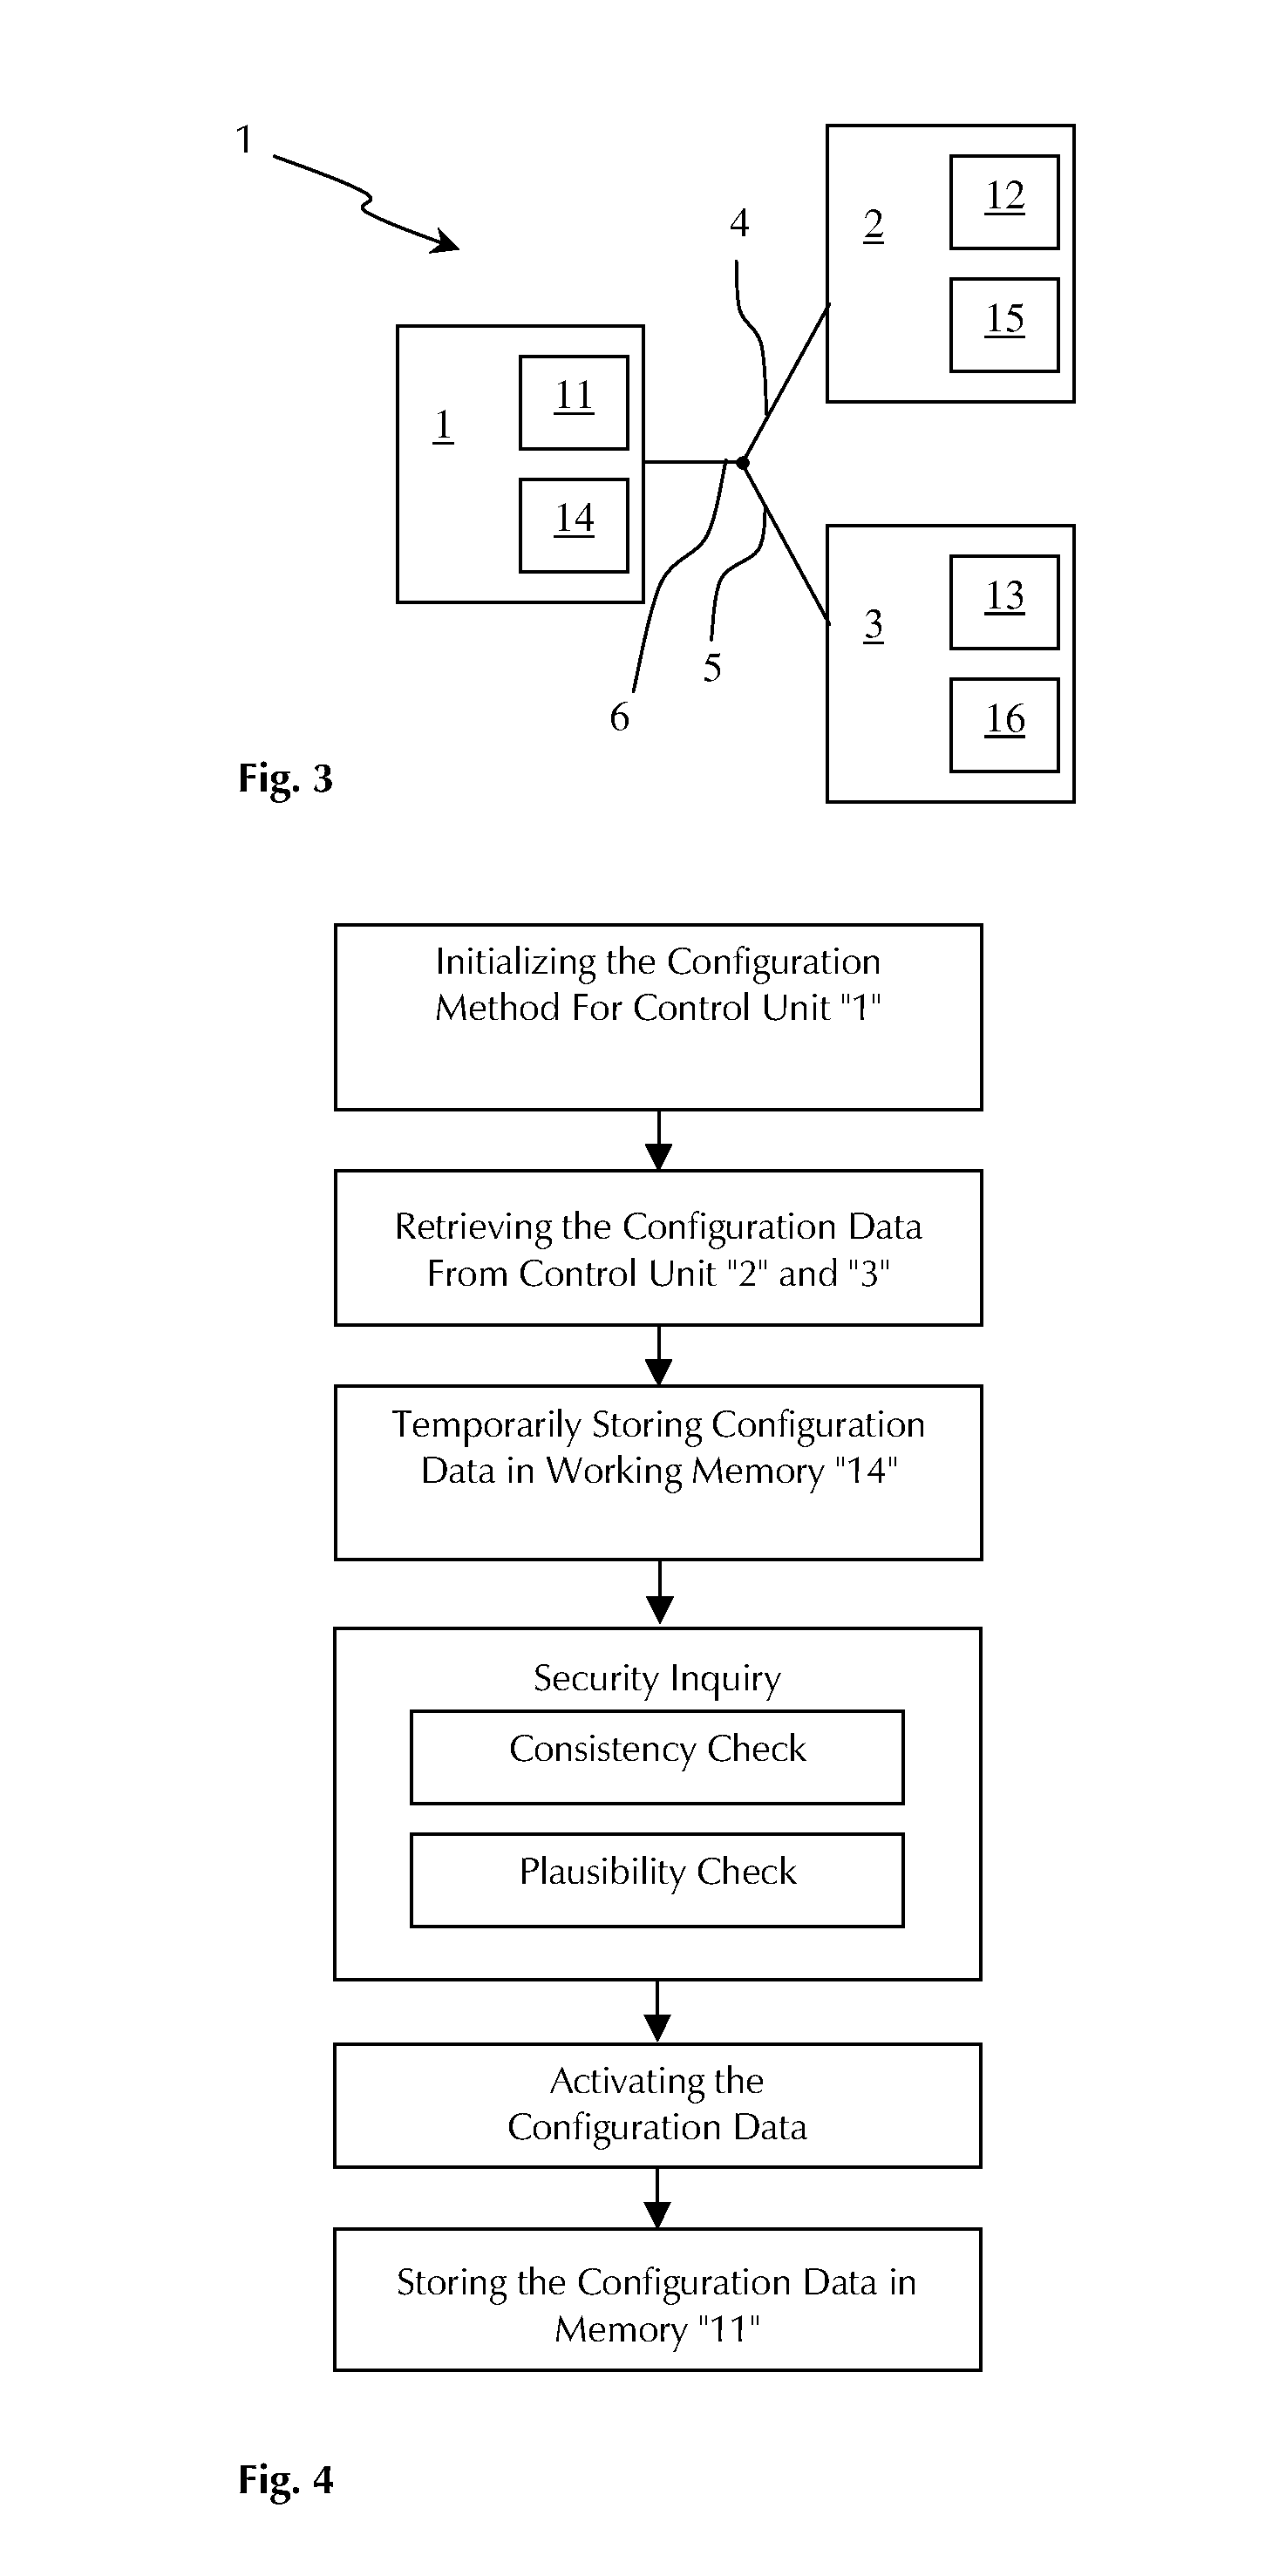 Configuration method for control units